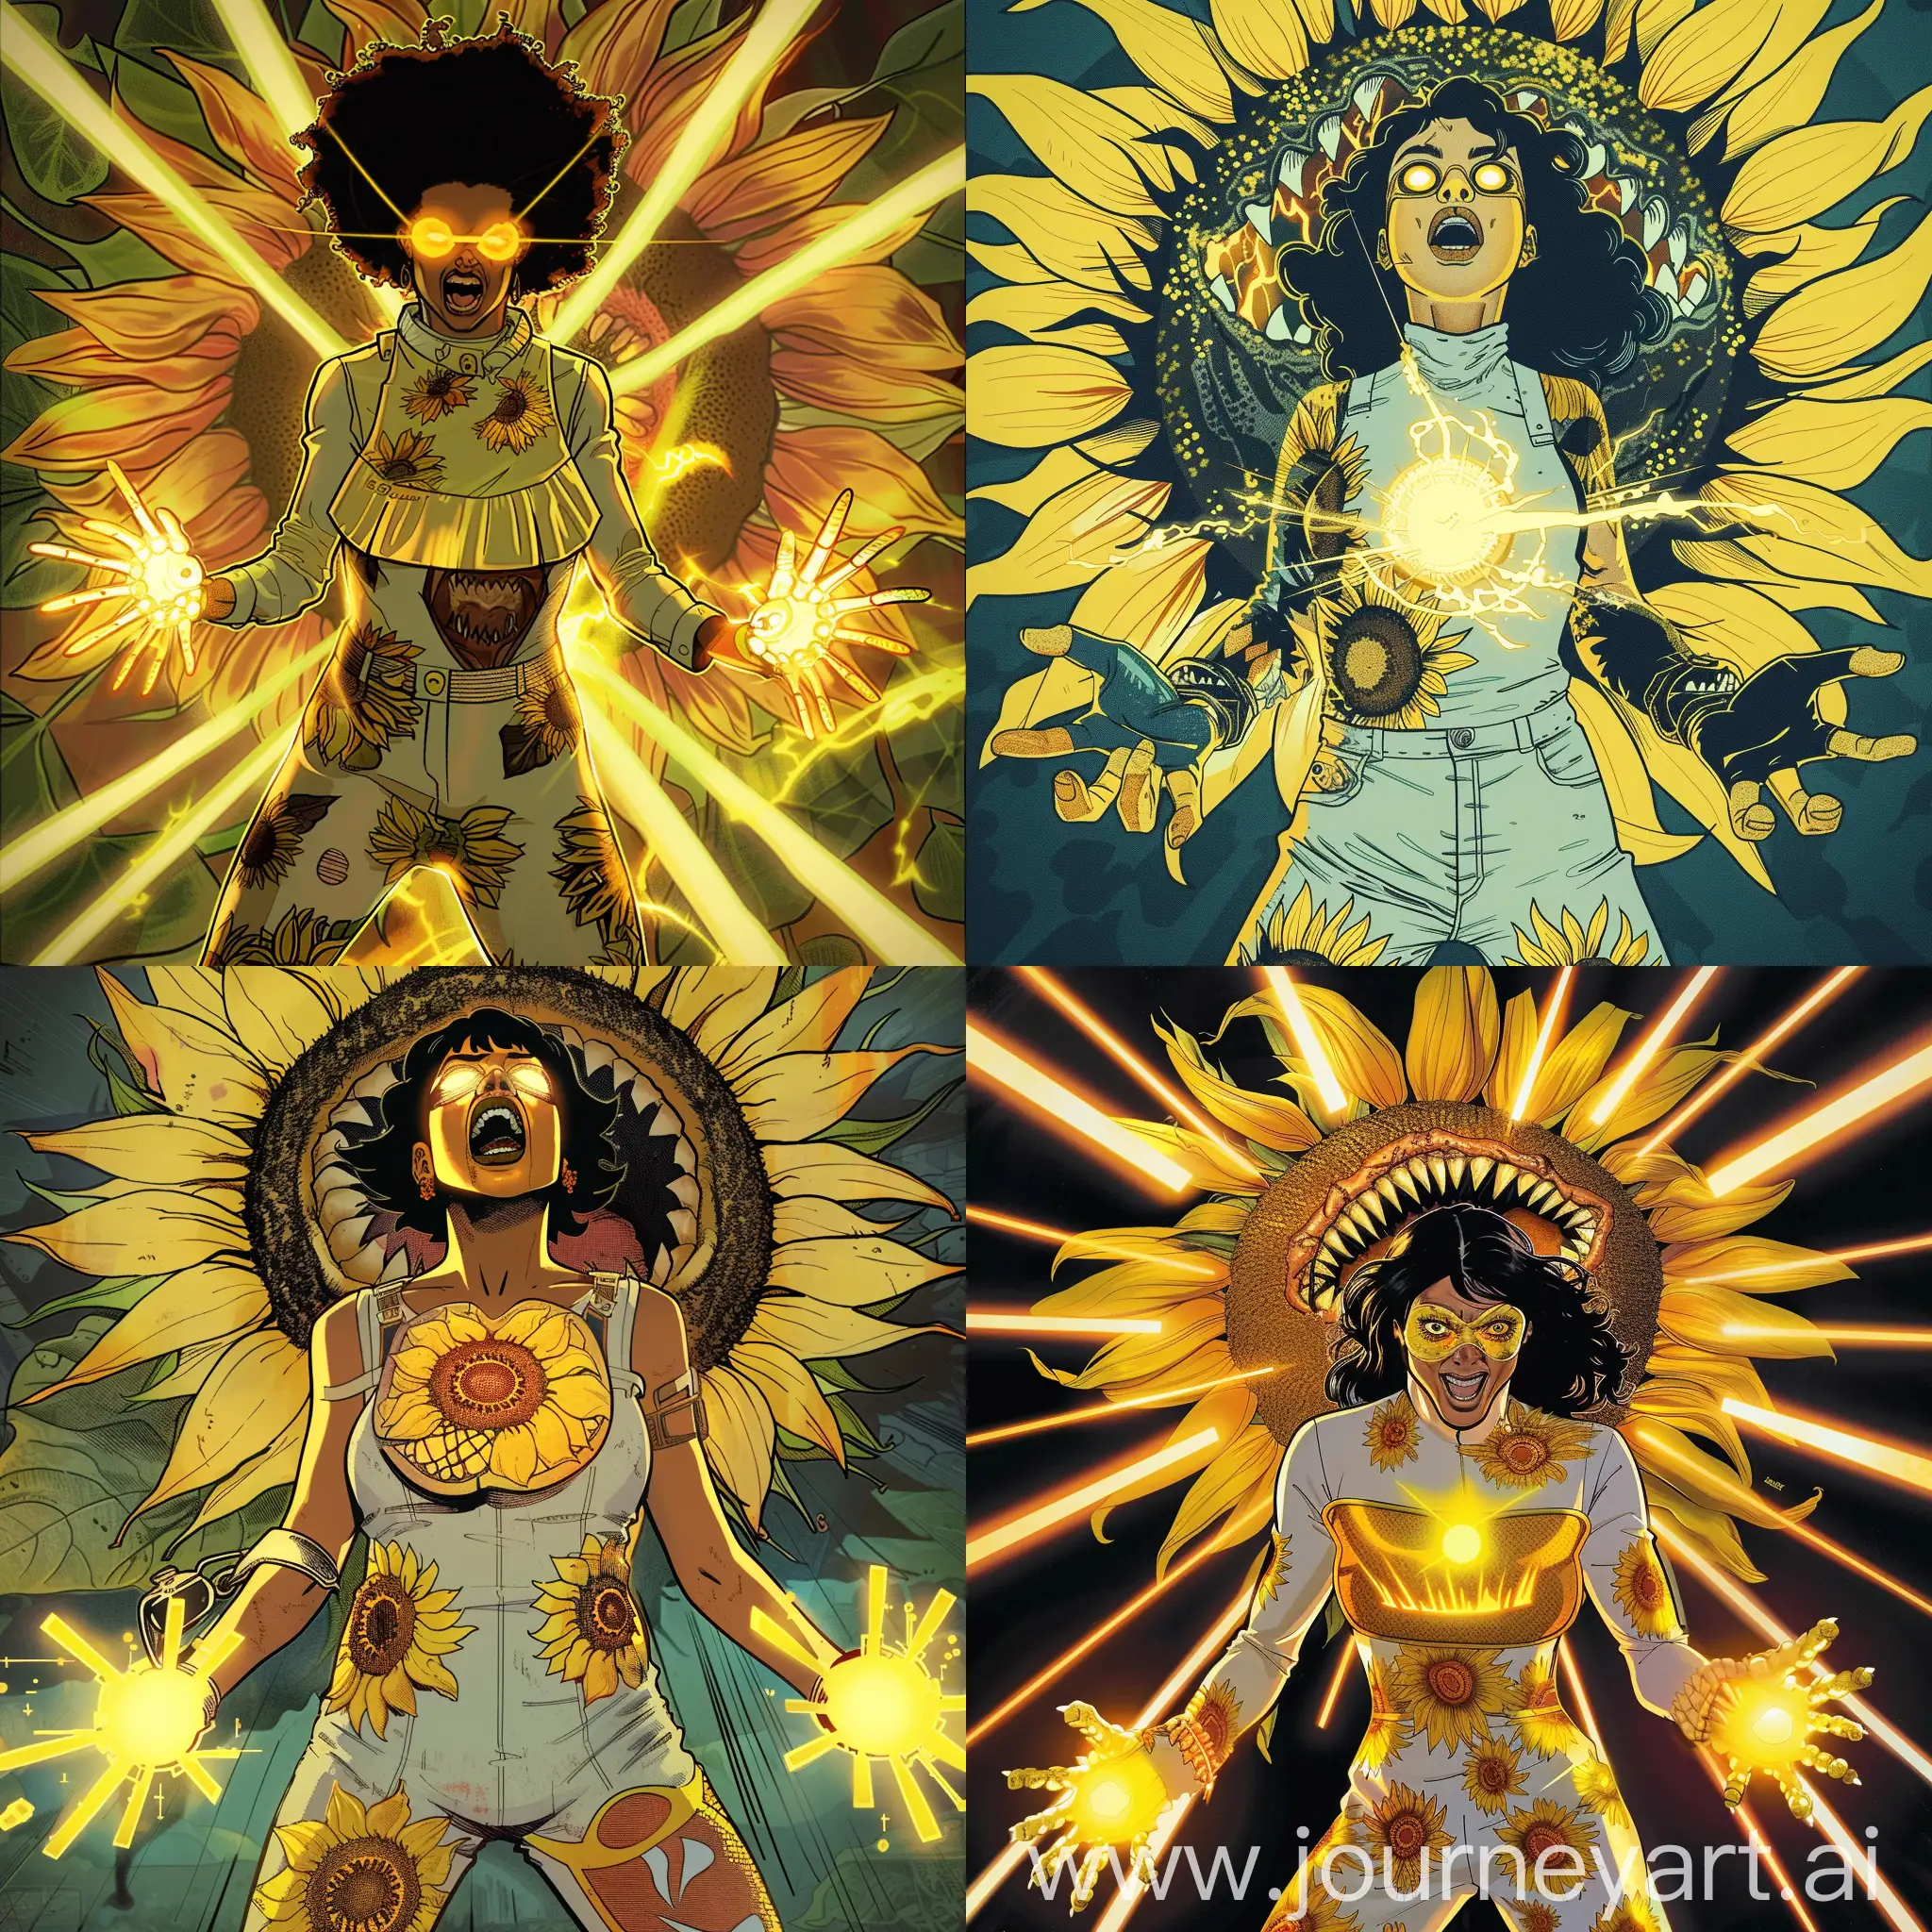 a woman dressed as a bib with sunflower designs on her jumpsuit, her hands and eyes emanating a yellow glow and behind her is a giant sunflower with a mouth and sharp teeth (she controls it in panel comic Marvel  comic style)